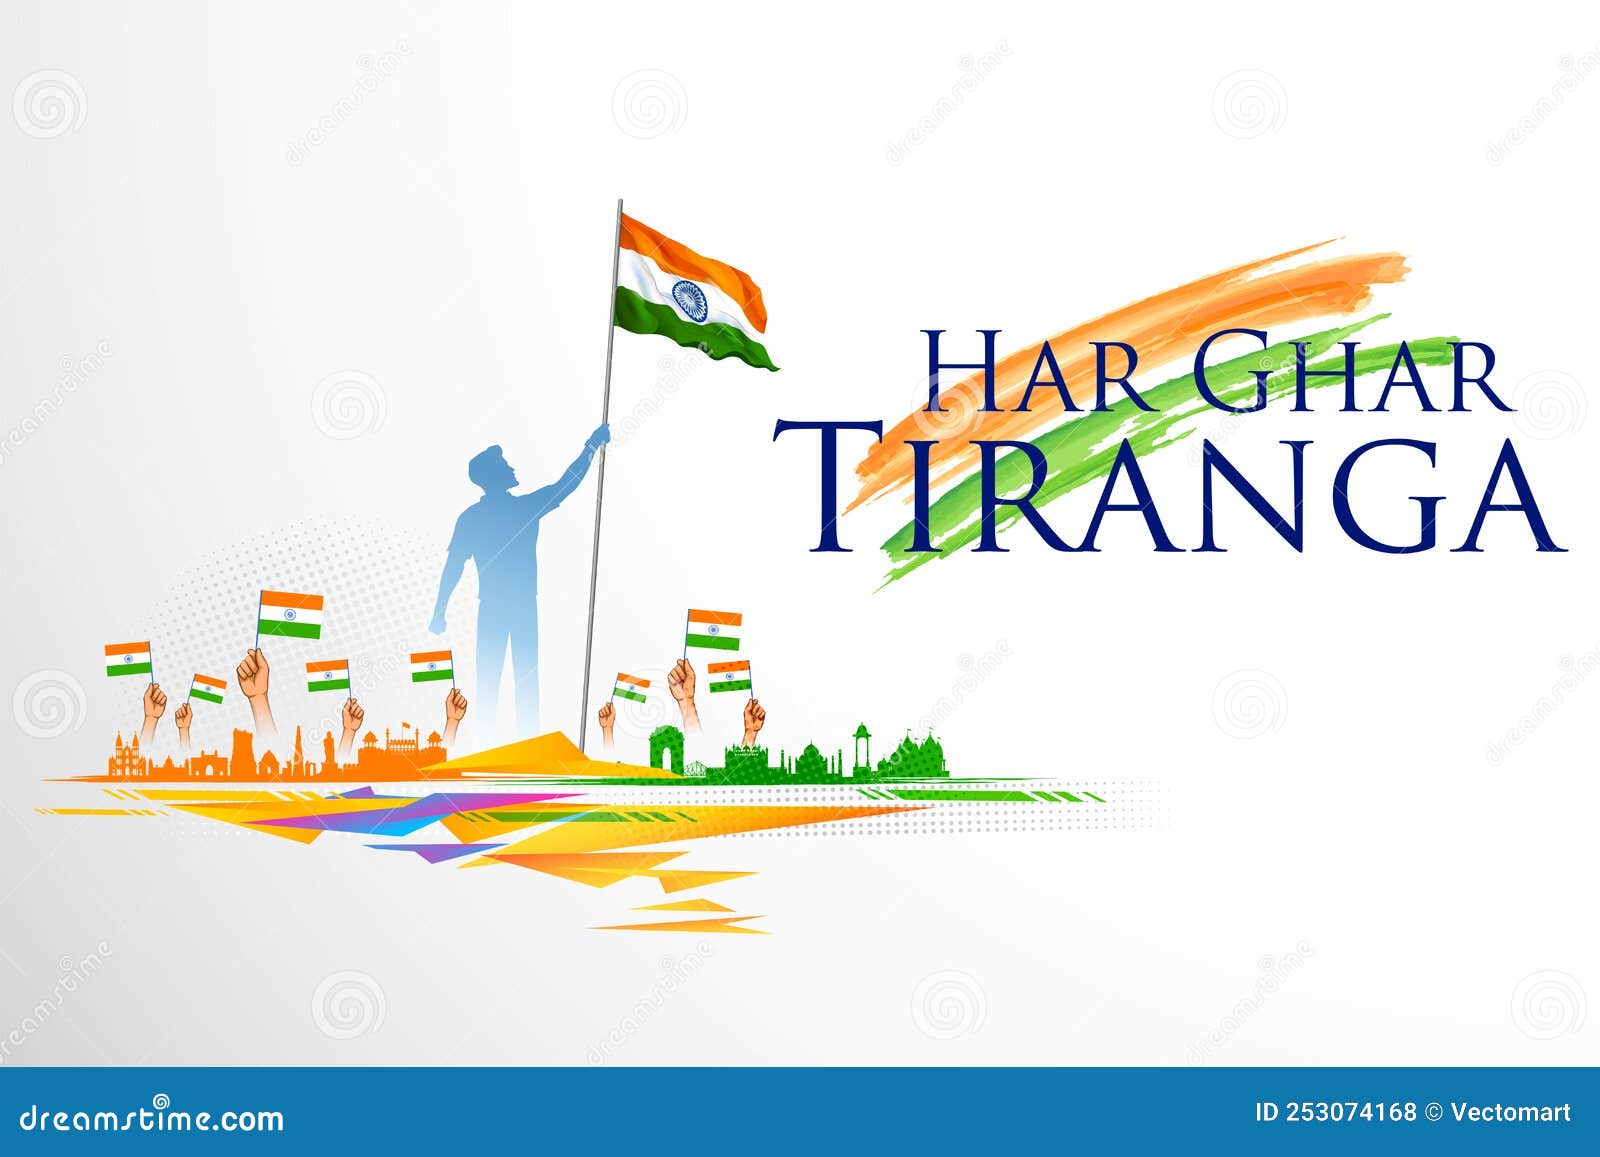 Abstract Tricolor Banner with Indian Flag for 15th August Happy  Independence Day of India Har Ghar Tiranga Stock Vector - Illustration of  hinduism, festival: 253074168